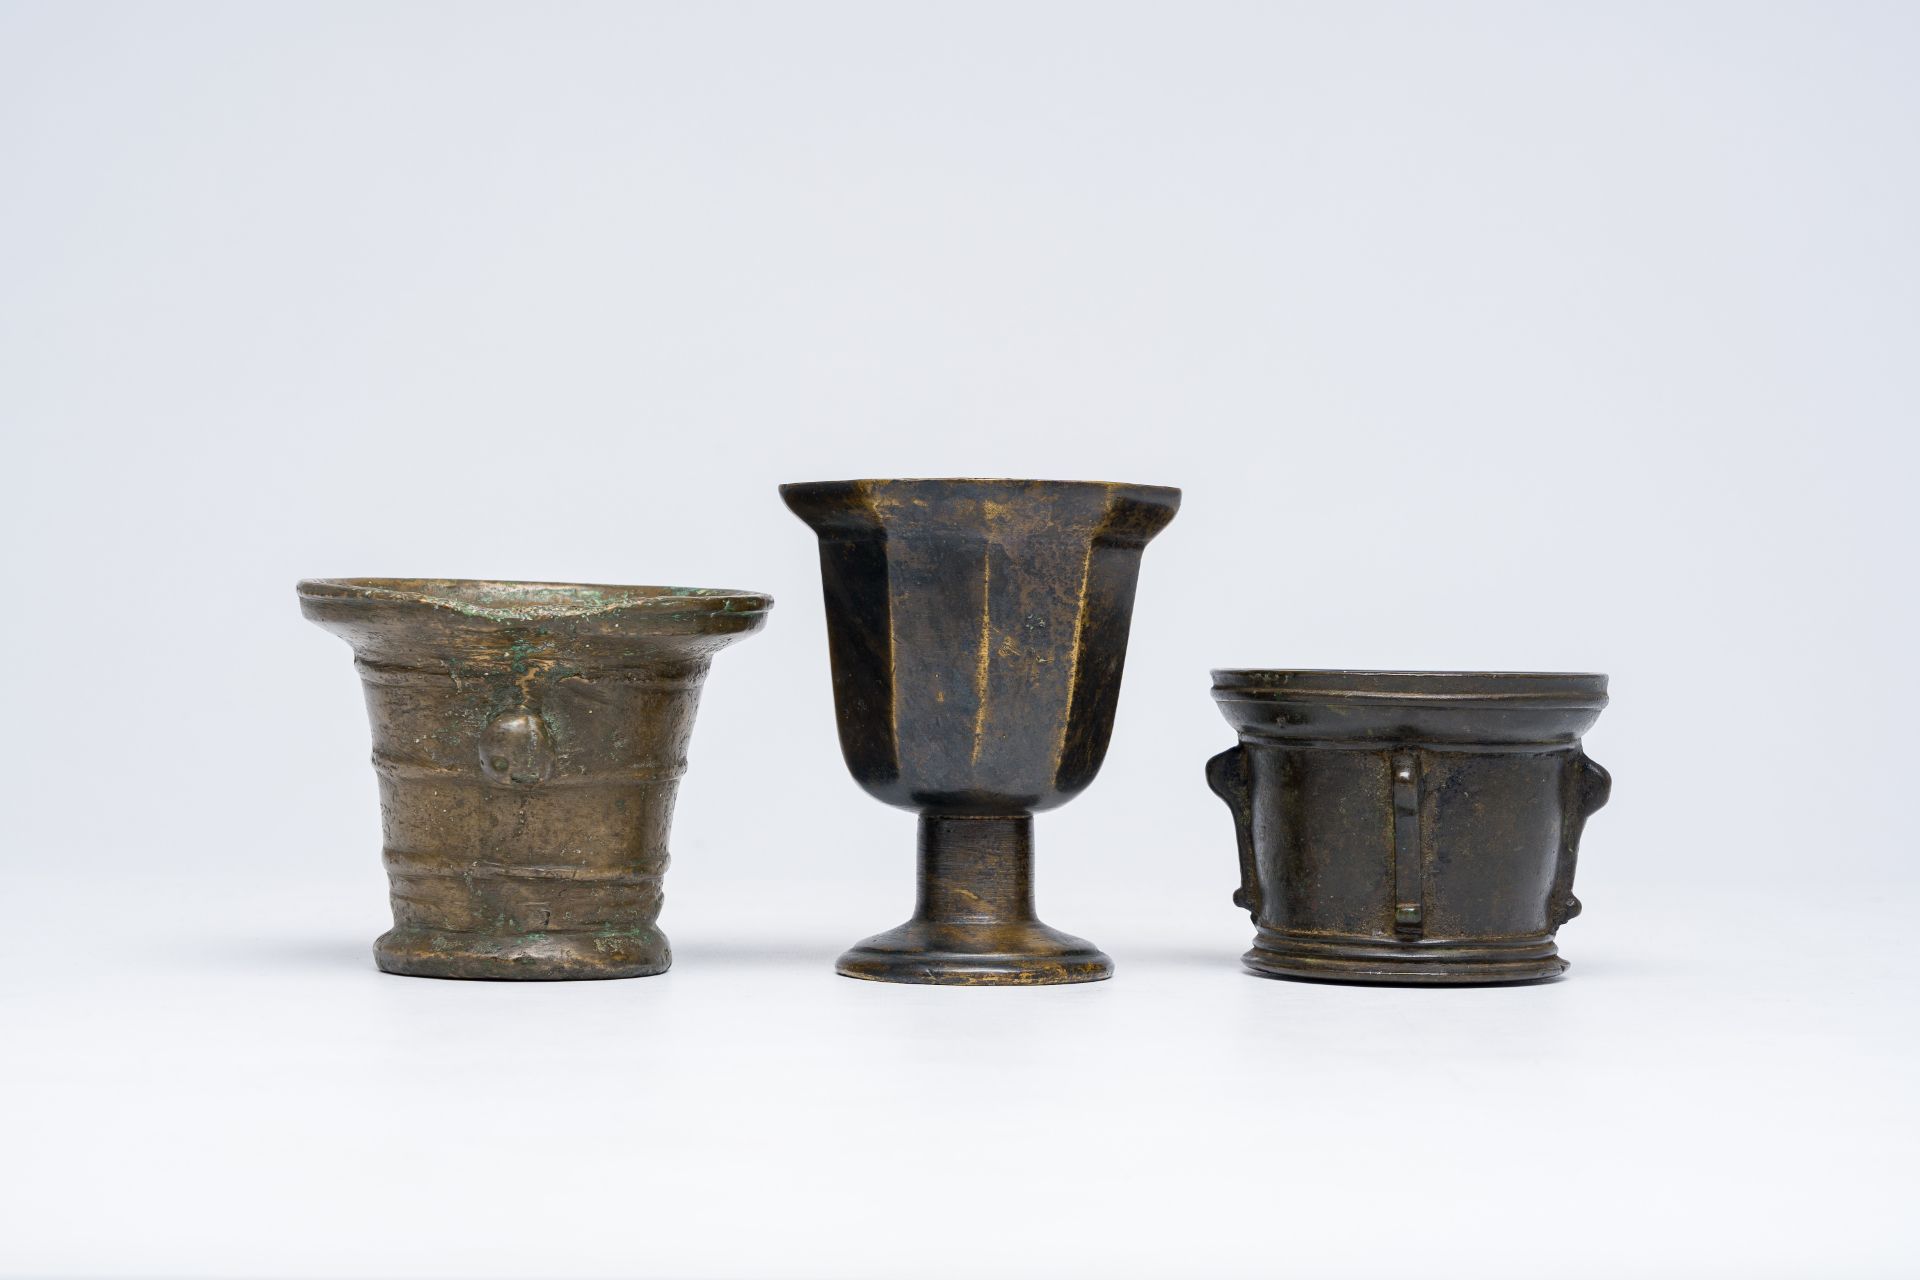 Two bronze mortars and a footed goblet, France and/or Italy, 16th C. - Image 5 of 7